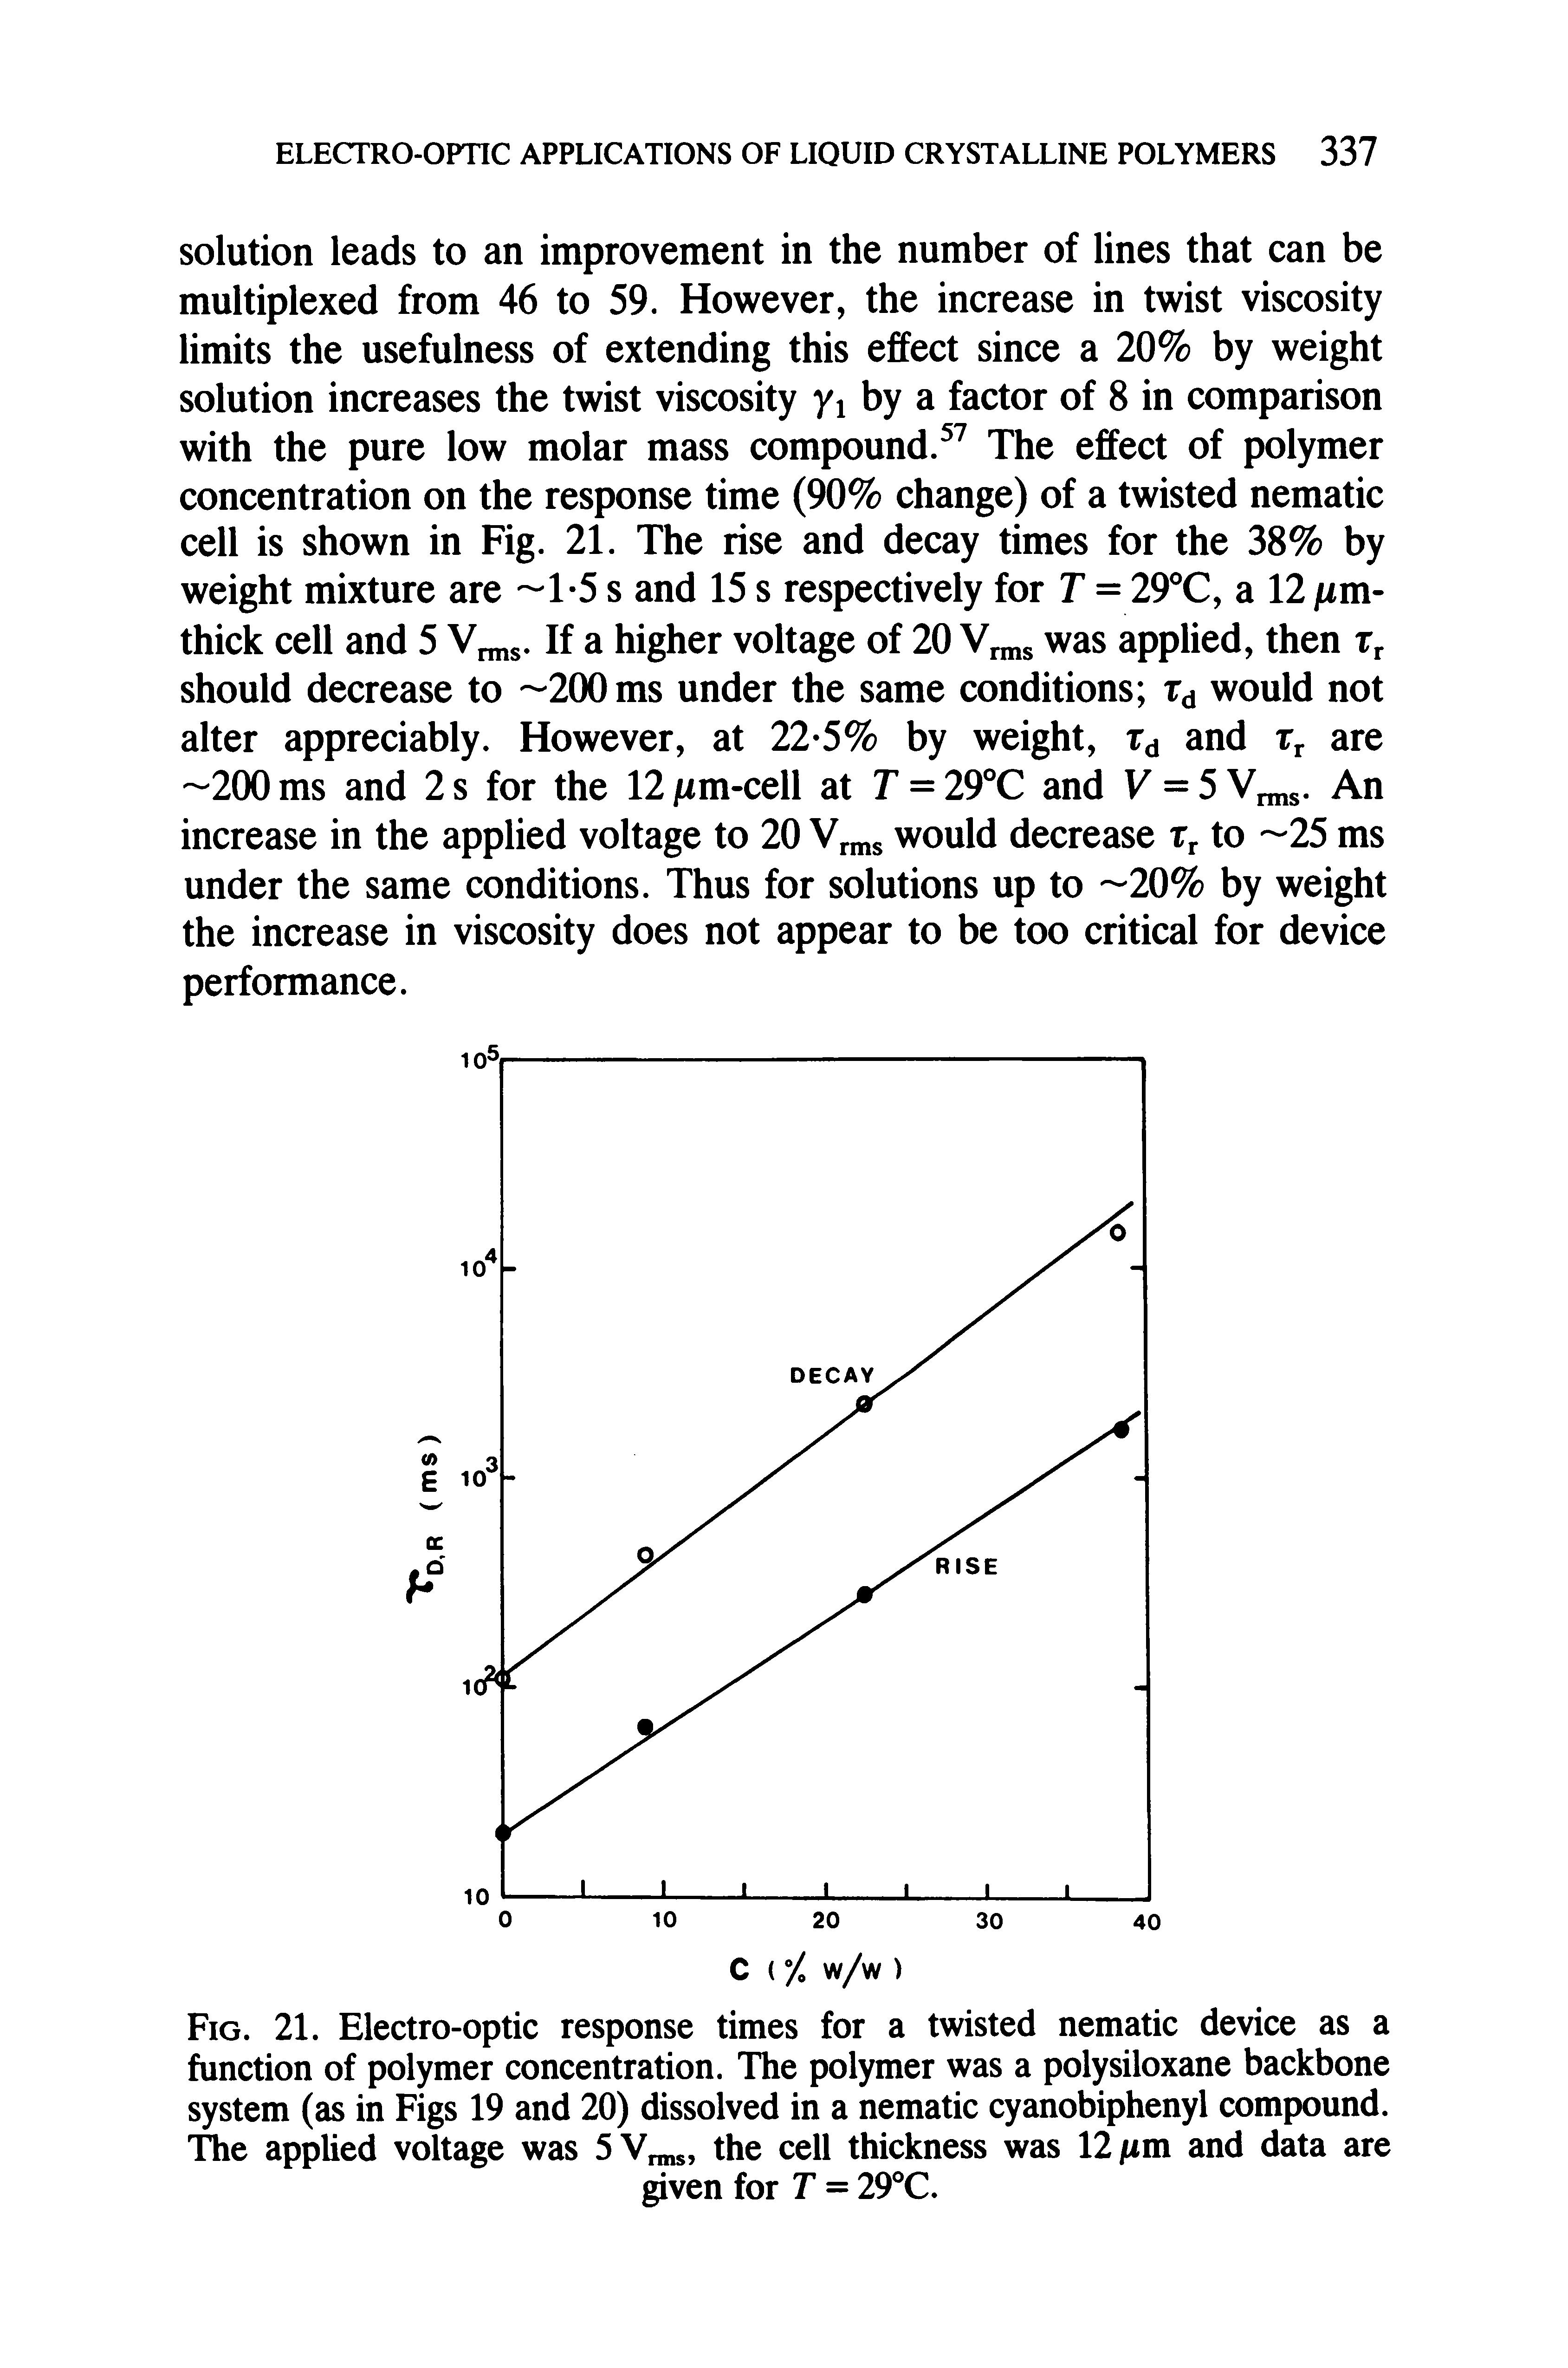 Fig. 21. Electro-optic response times for a twisted nematic device as a function of polymer concentration. The polymer was a polysiloxane backbone system (as in Figs 19 and 20) dissolved in a nematic cyanobiphenyl compound. Ihe applied voltage was 5Vn, , the cell thickness was 12jum and data are...